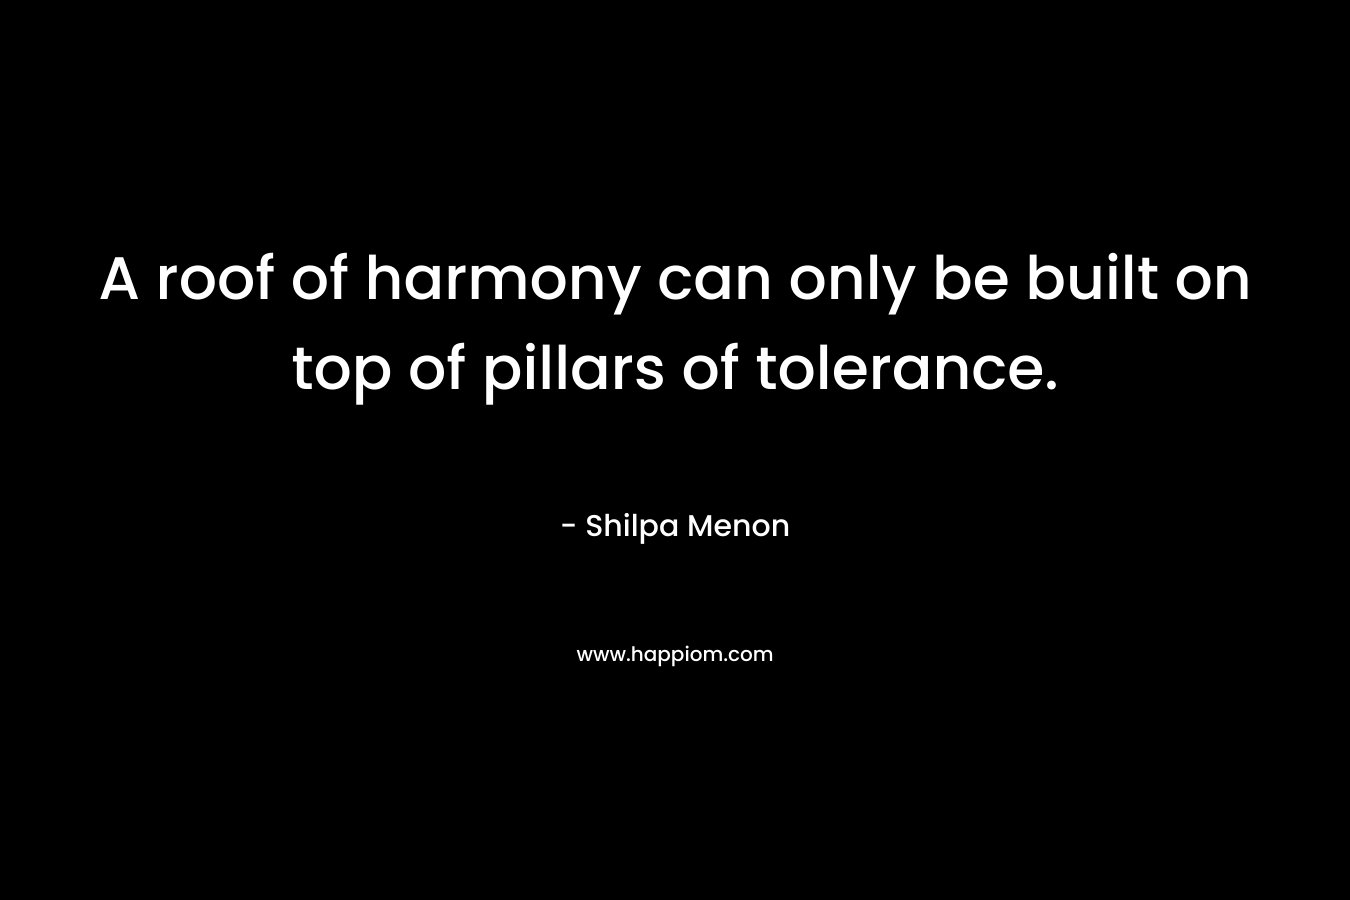 A roof of harmony can only be built on top of pillars of tolerance. – Shilpa Menon